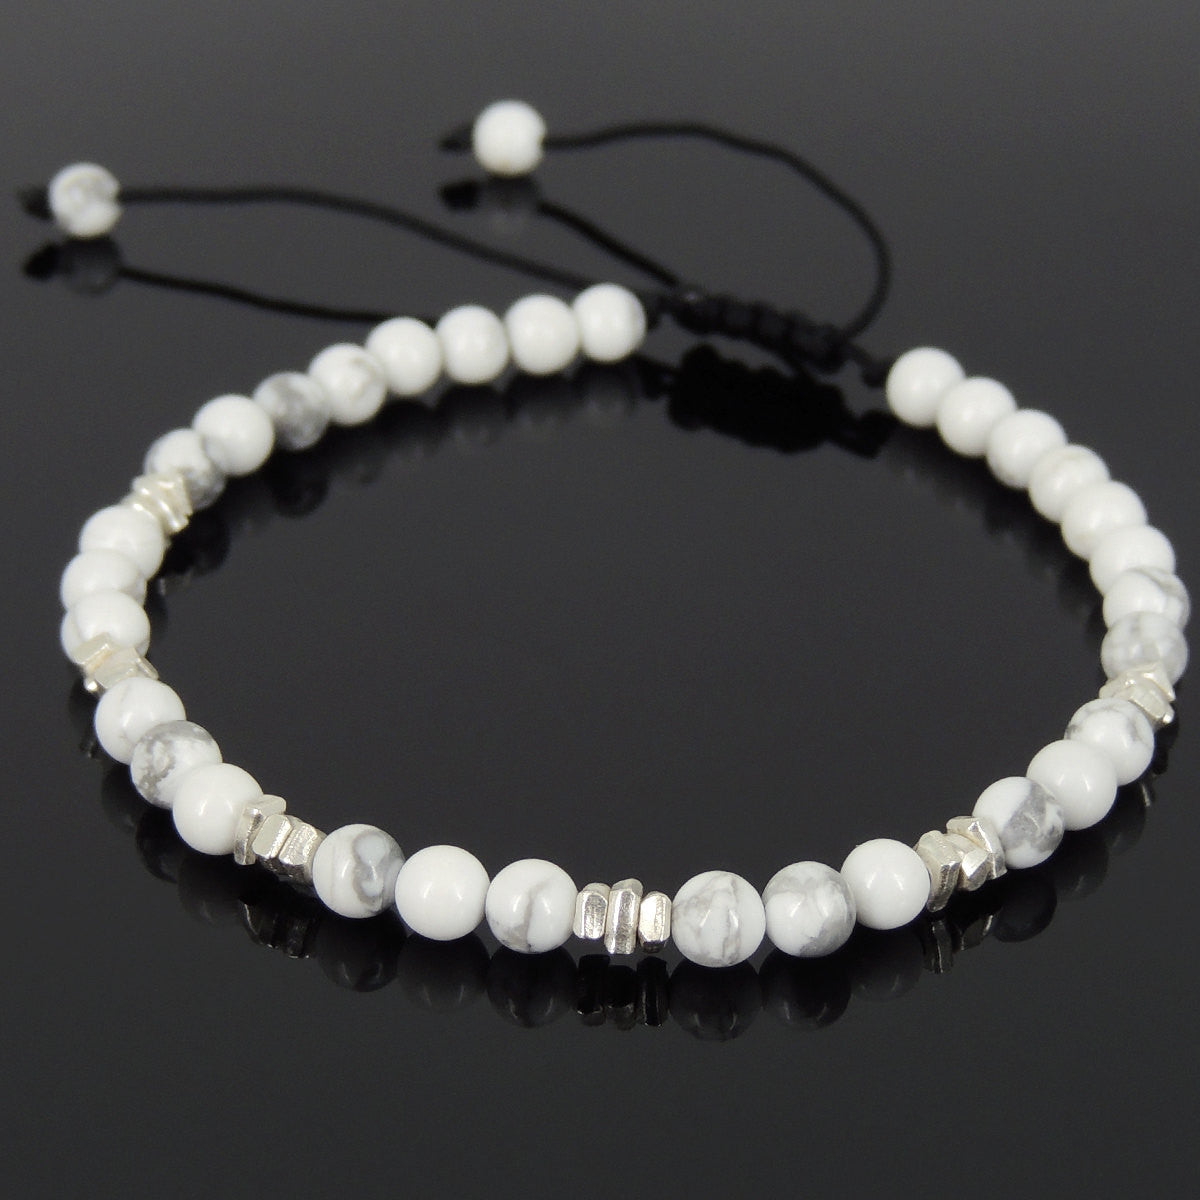 4mm White Howlite Adjustable Braided Gemstone Bracelet with S925 Sterling Silver Nugget Beads  - Handmade by Gem & Silver BR952